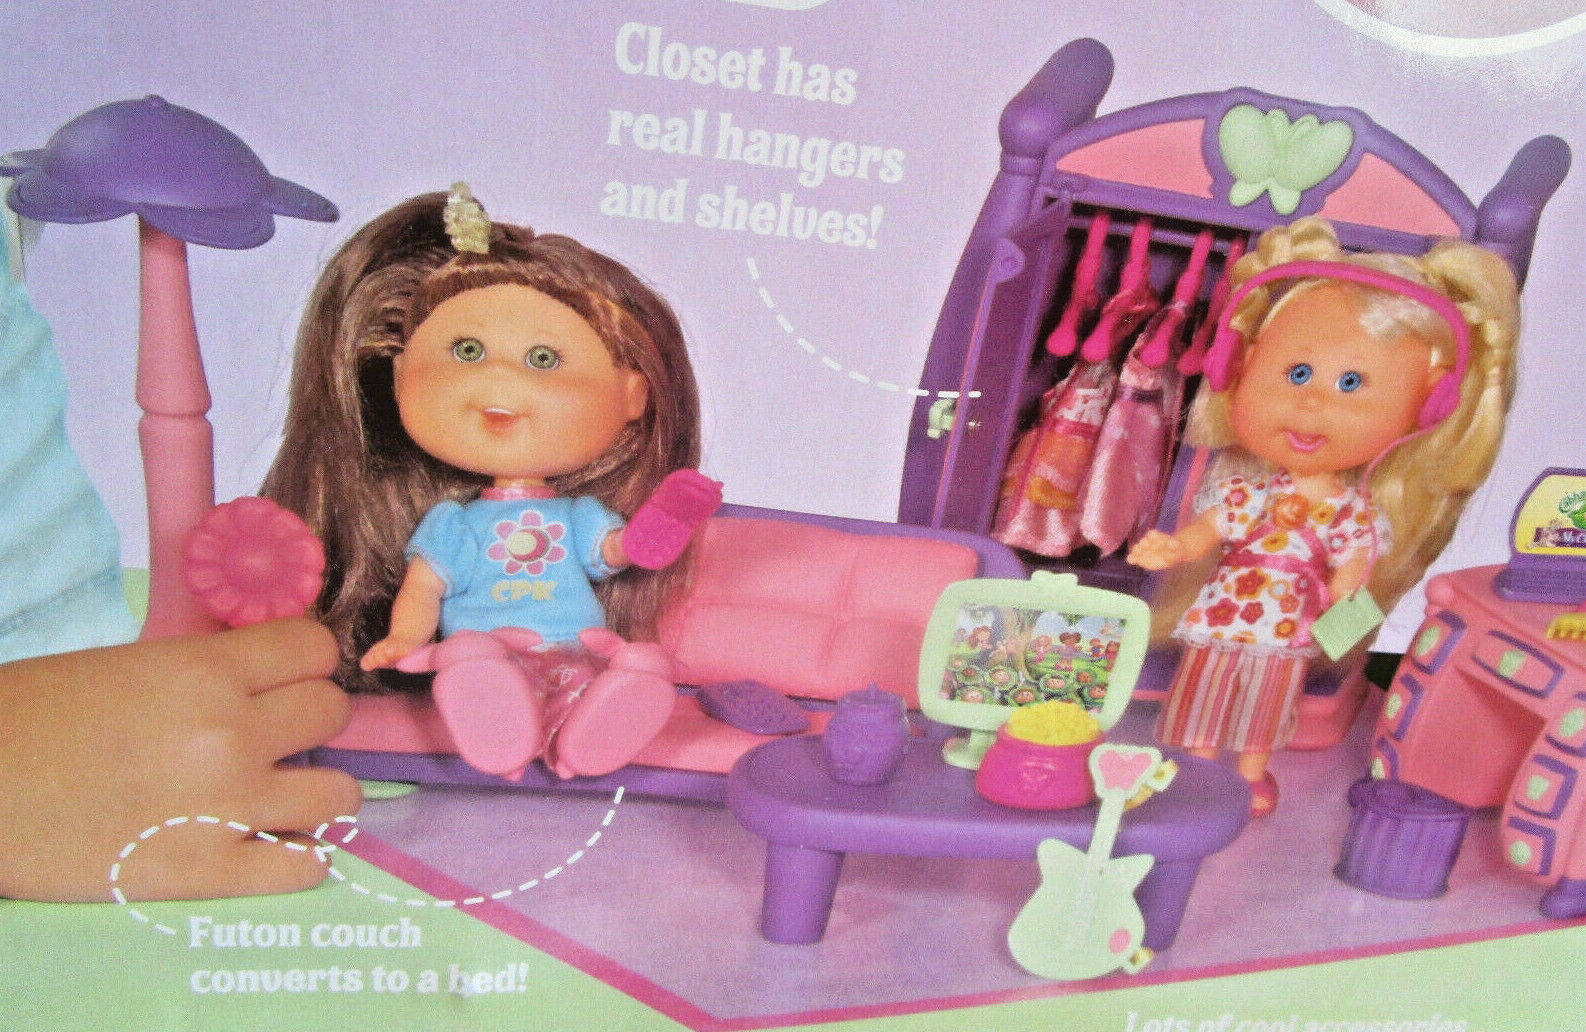 NEW 26 piece FURNITURE PLAY SET Cabbage Patch Lil Sprouts & dolls to 5" tall - $20.99